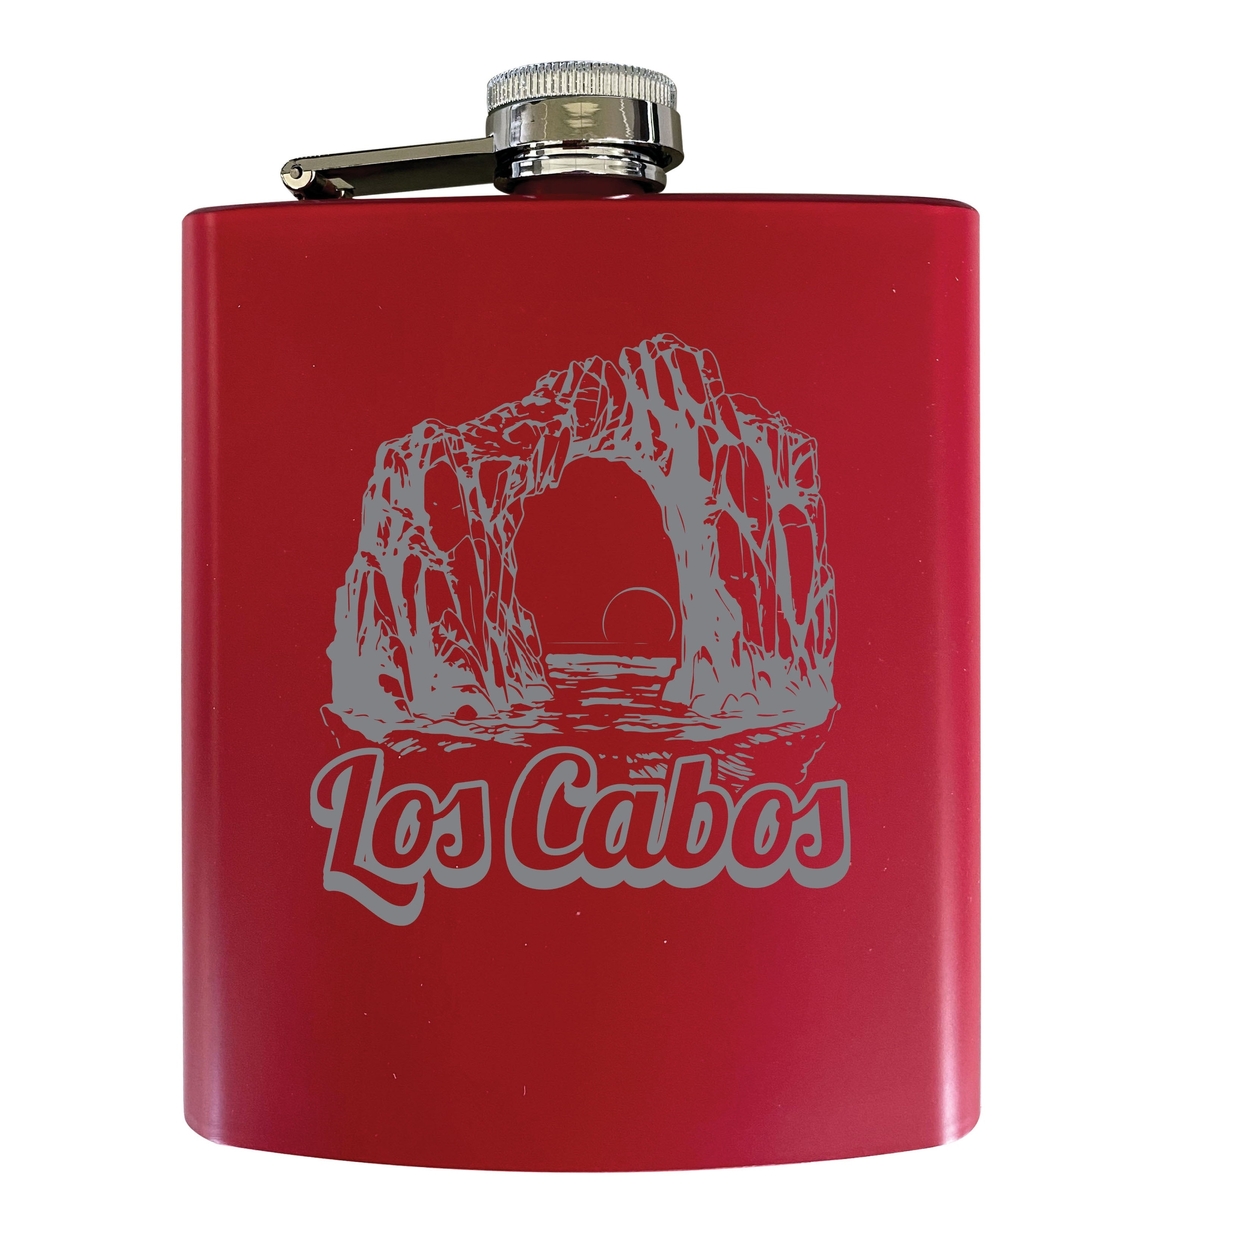 Los Cabos Mexico Souvenir 7 Oz Engraved Steel Flask Matte Finish - Red,,2-Pack